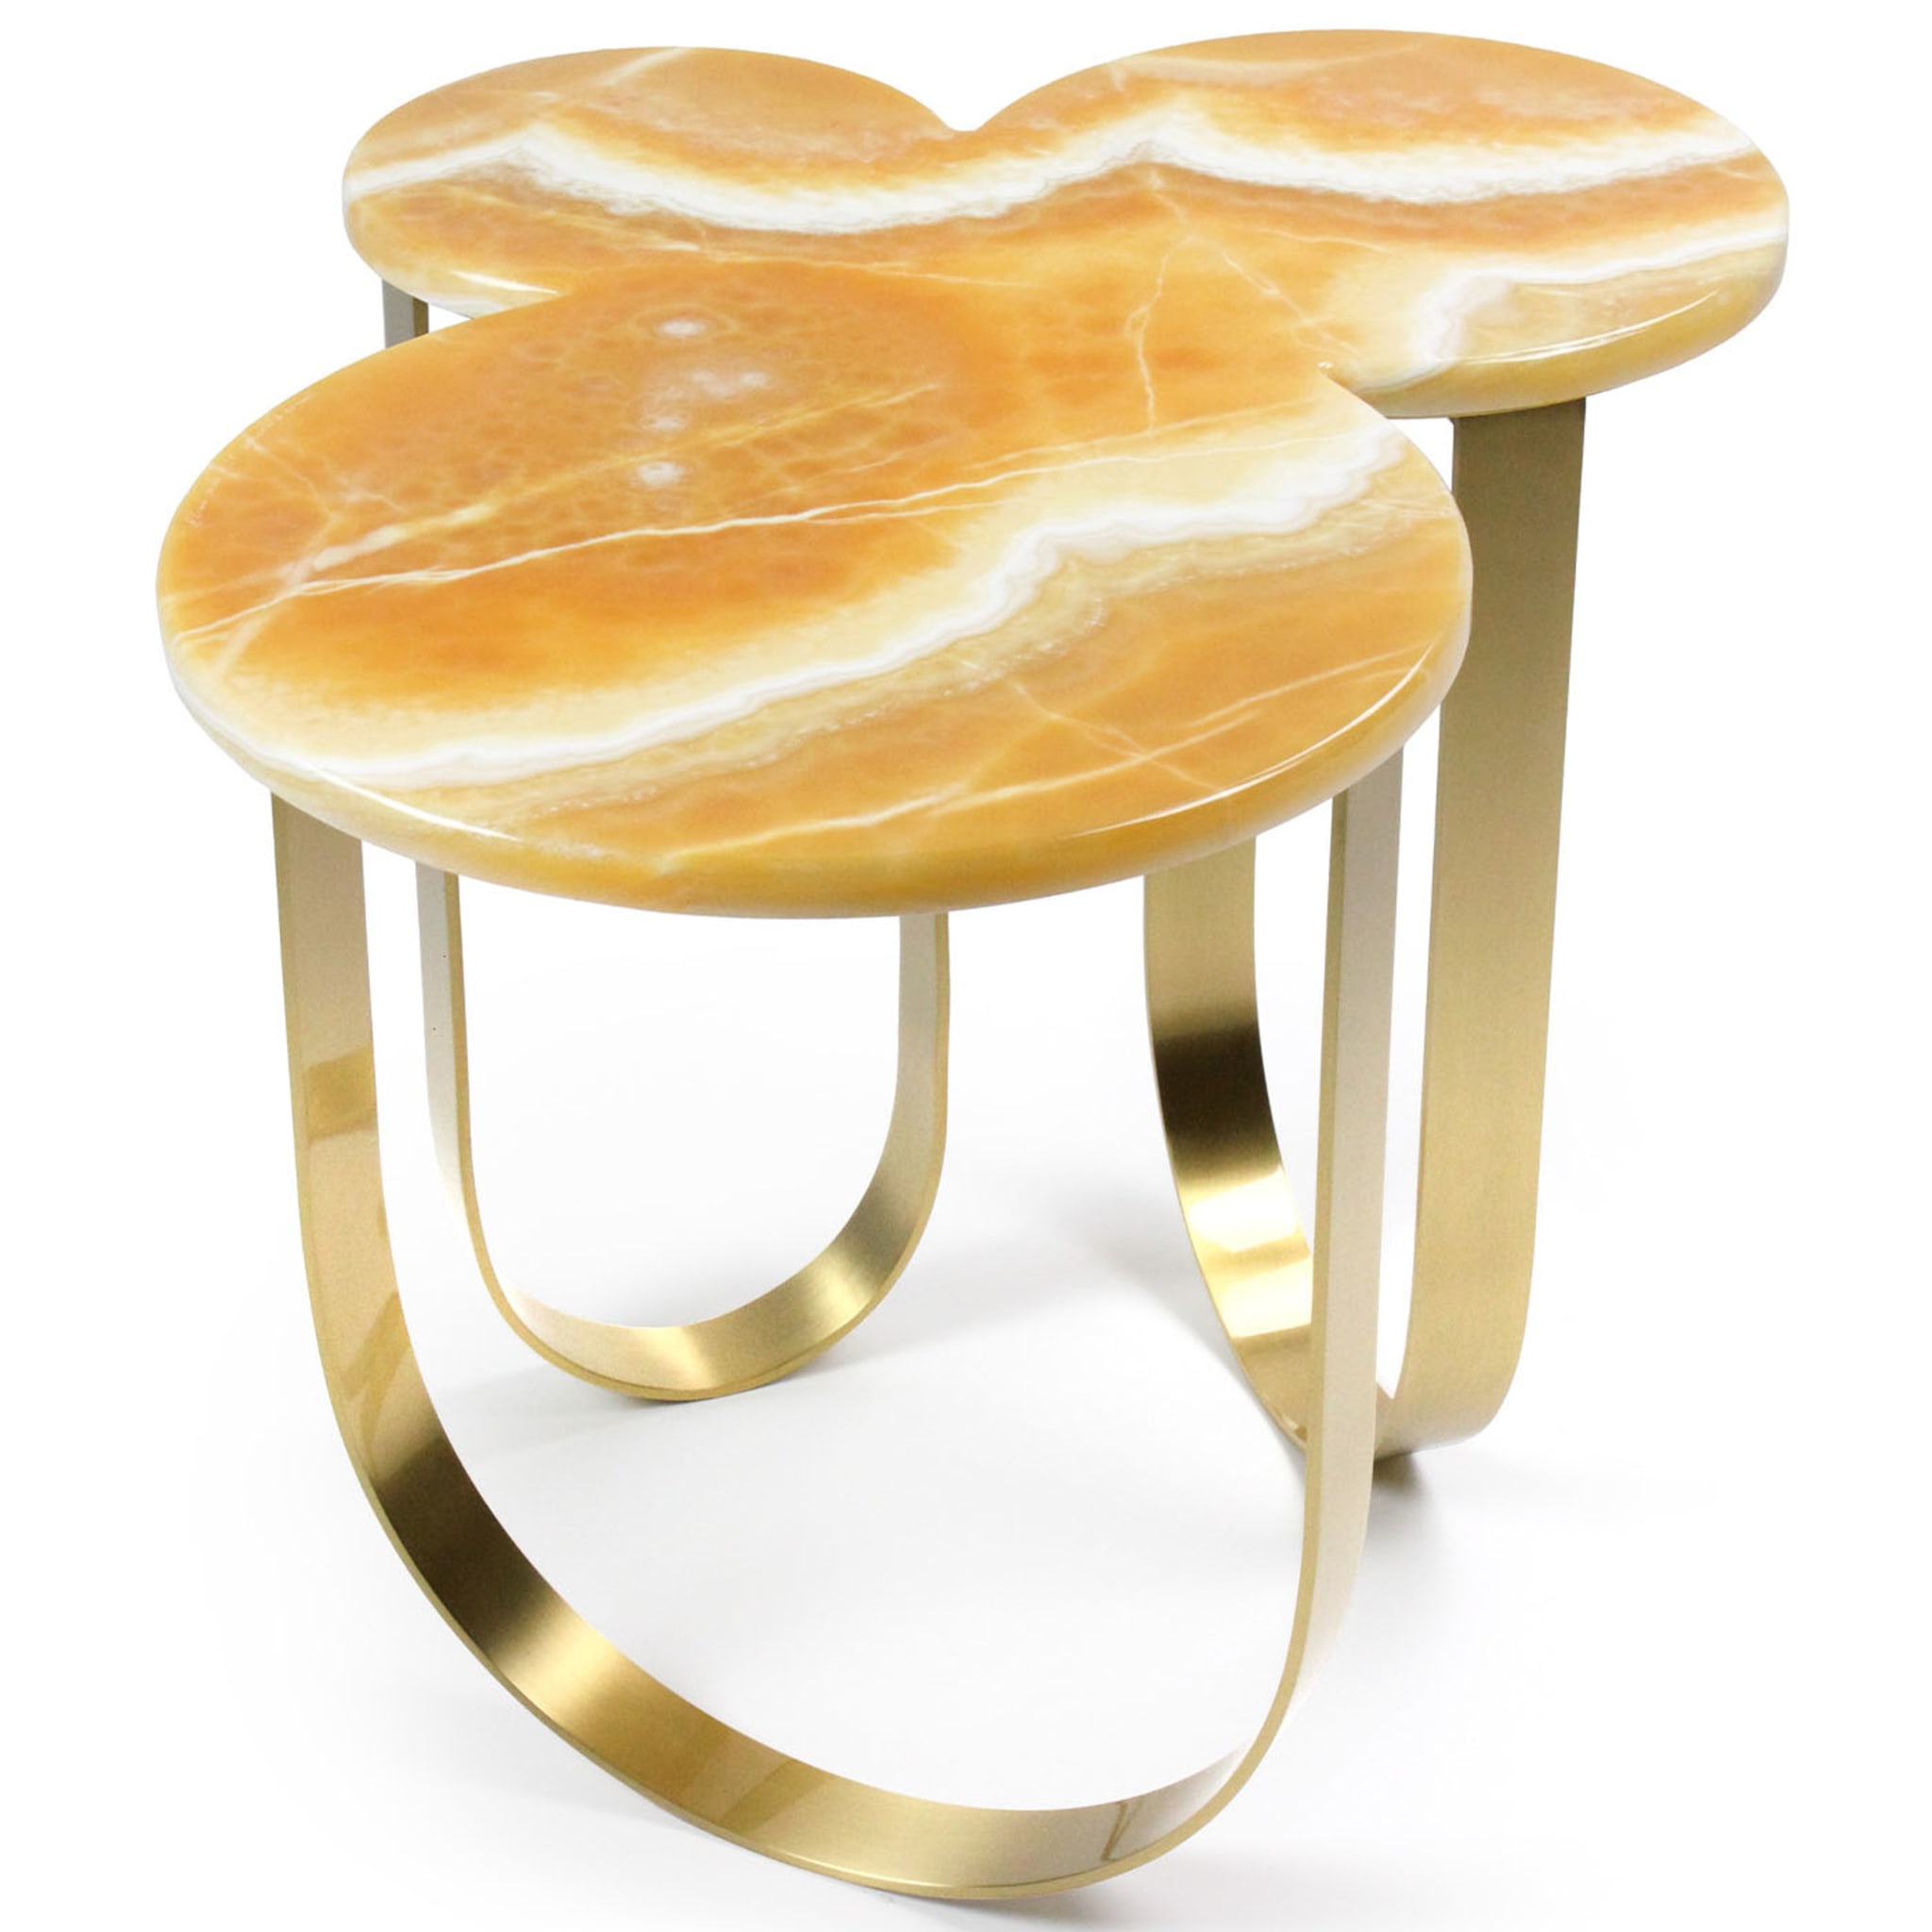 Cloud Onyx Side Table - Alternative view 1